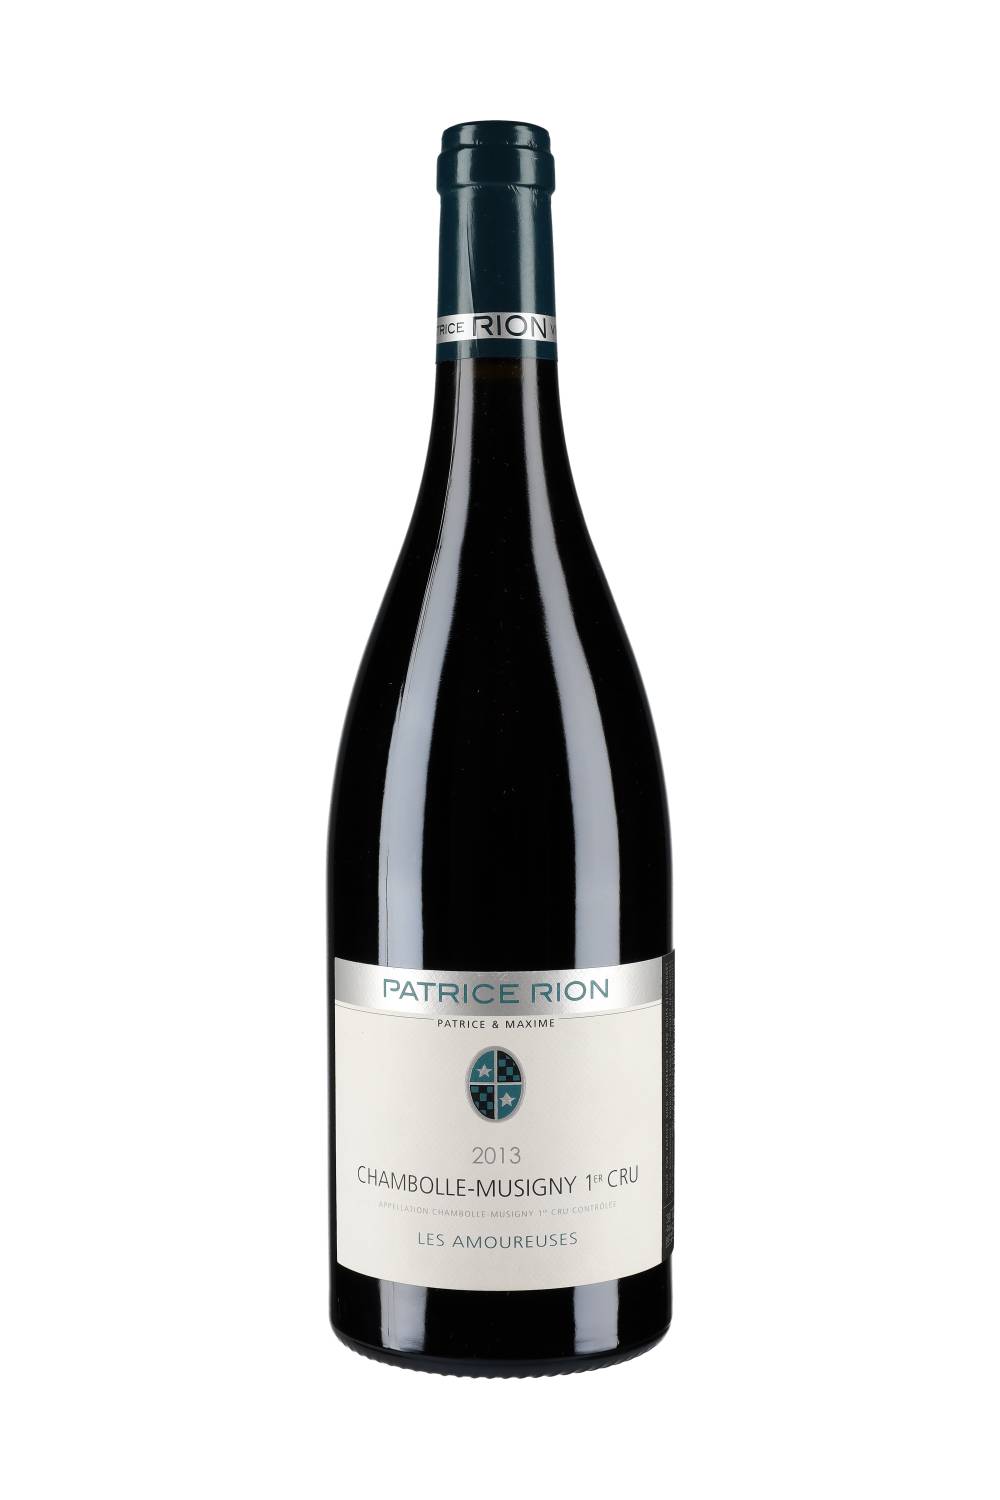 Domaine Patrice Rion Chambolle-Musigny Premier Cru 'Les Amoureuses' 2013